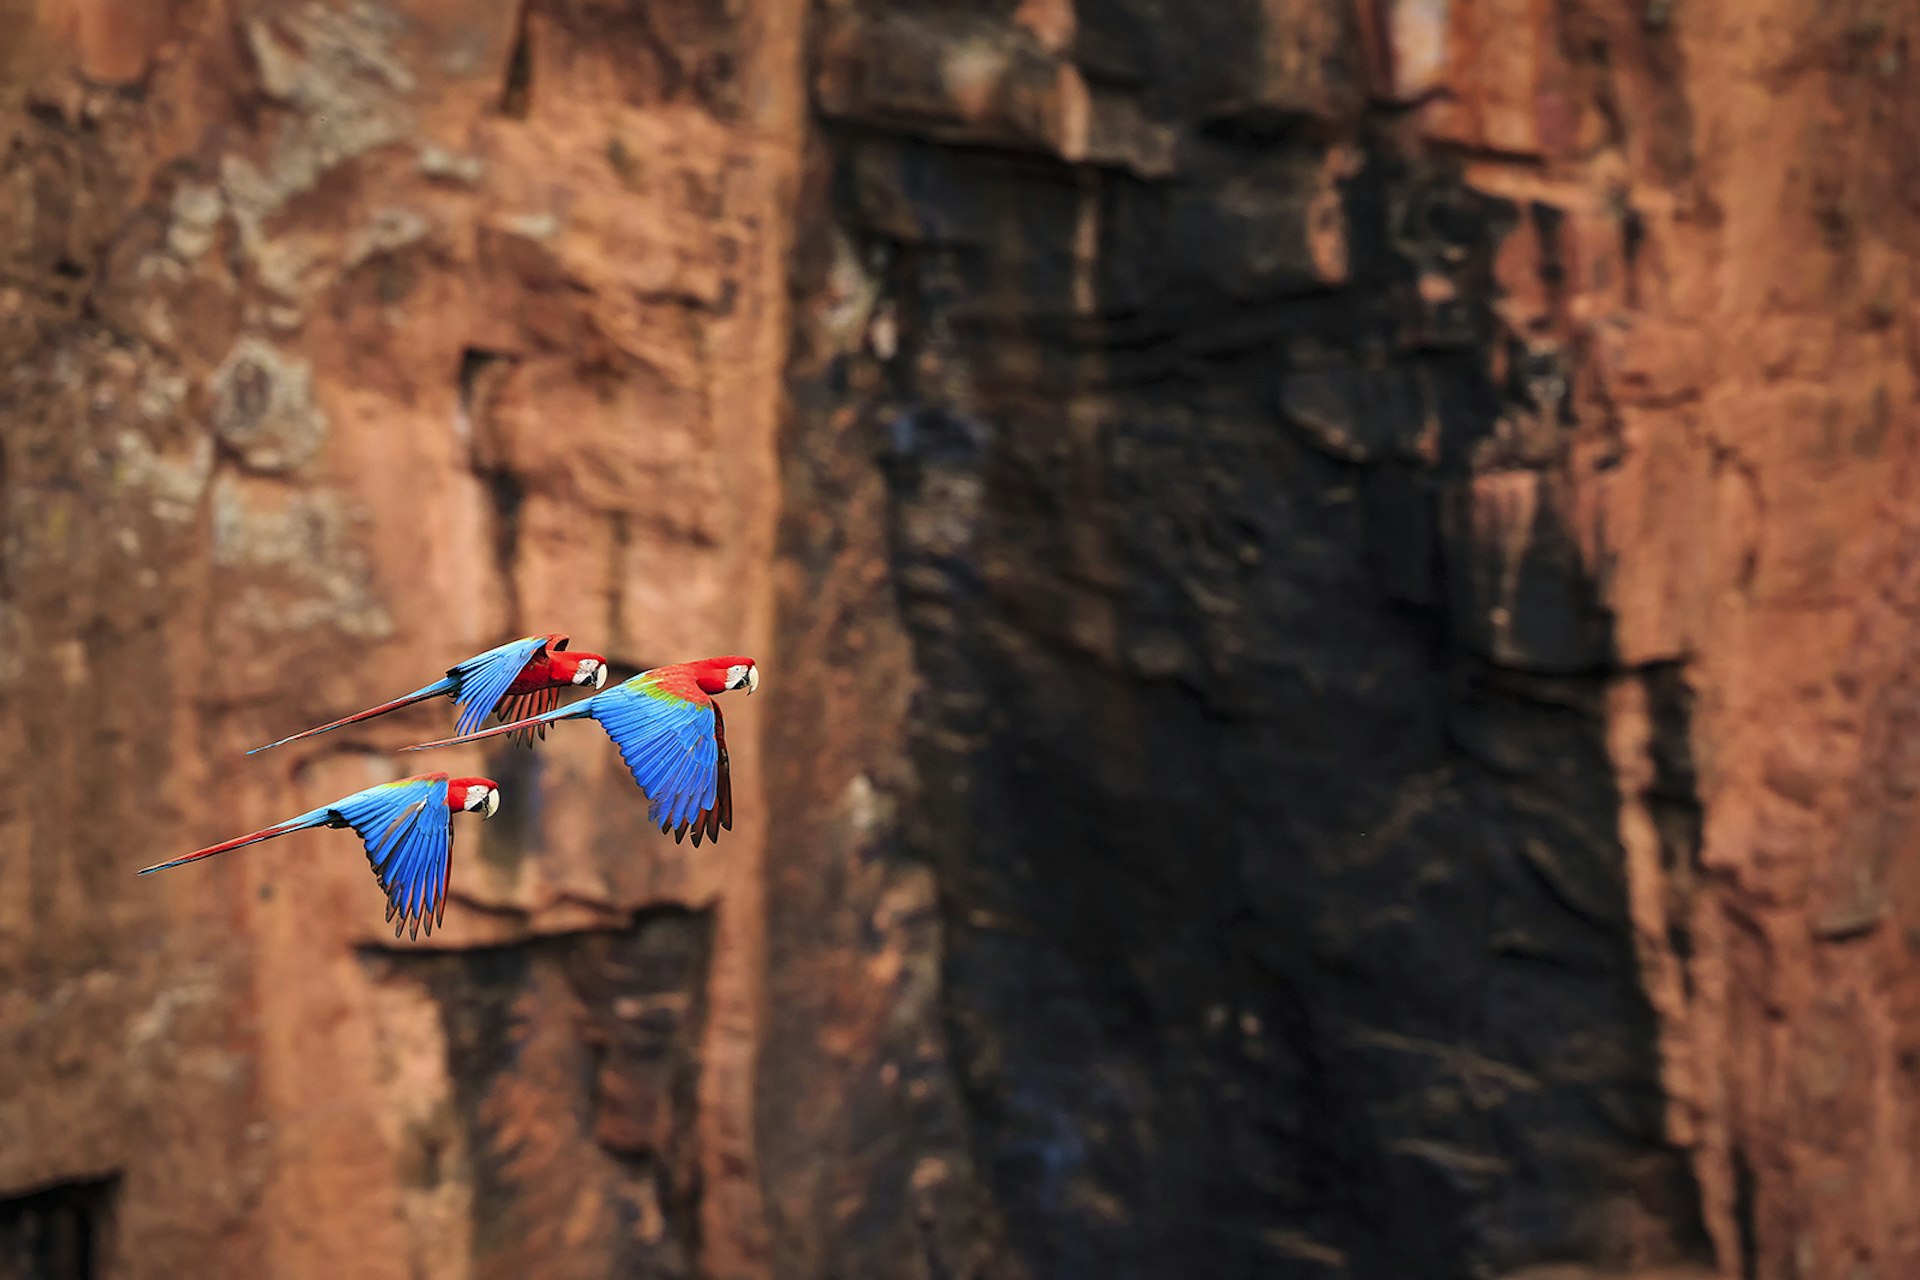 Three scarlet macaws fly against a background of red-toned stone